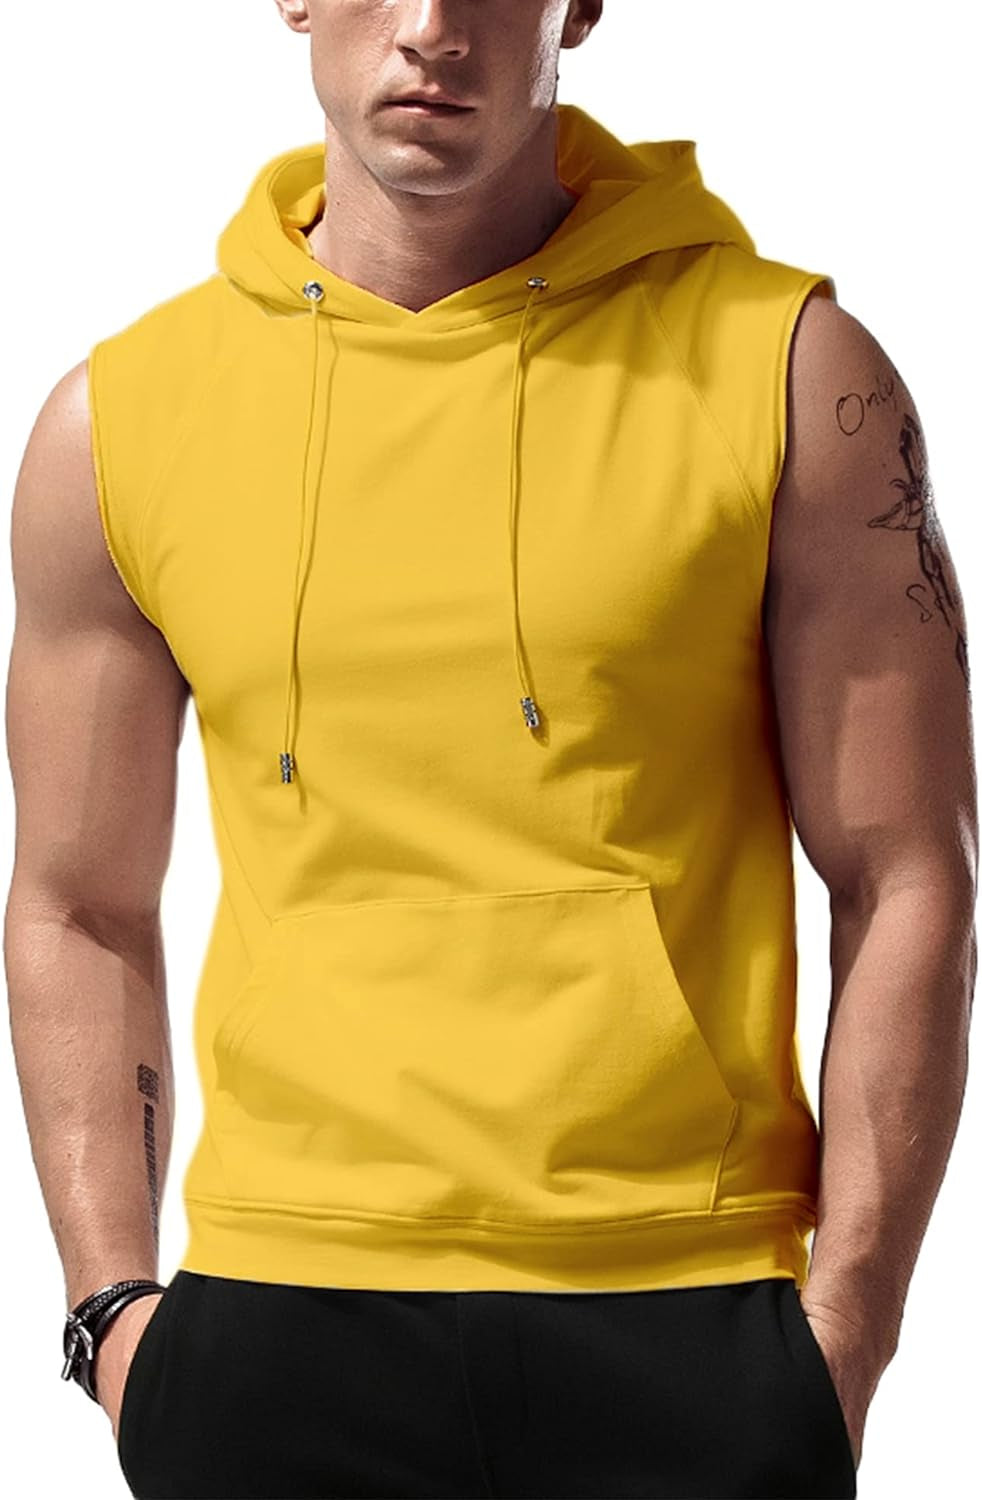 Men'S Workout Hooded Tank Tops Sleeveless Gym Hoodies Bodybuilding Muscle Cut off T-Shirts